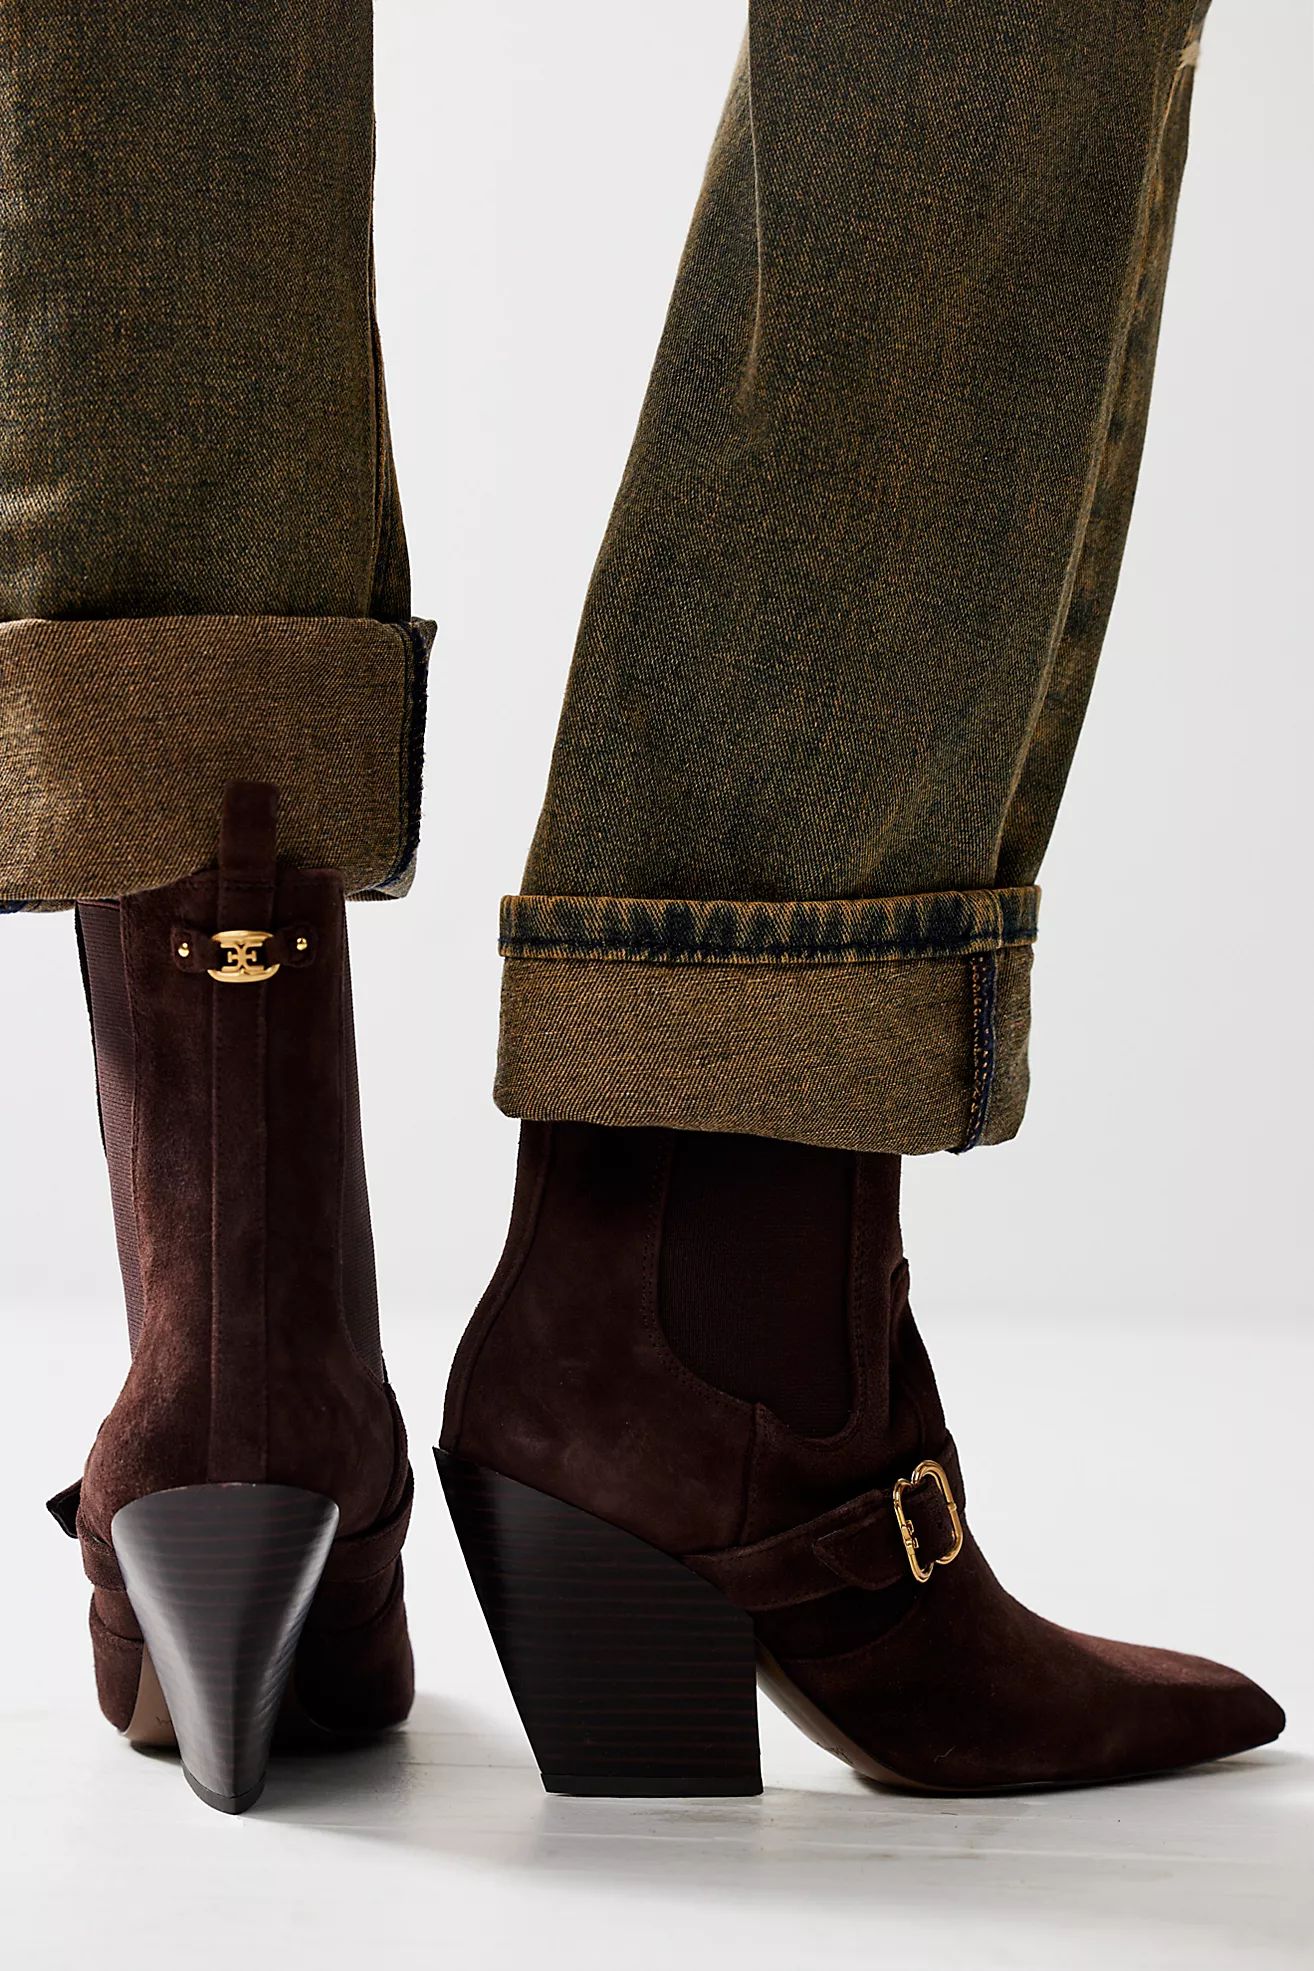 Bree Buckle Boots | Free People (UK)